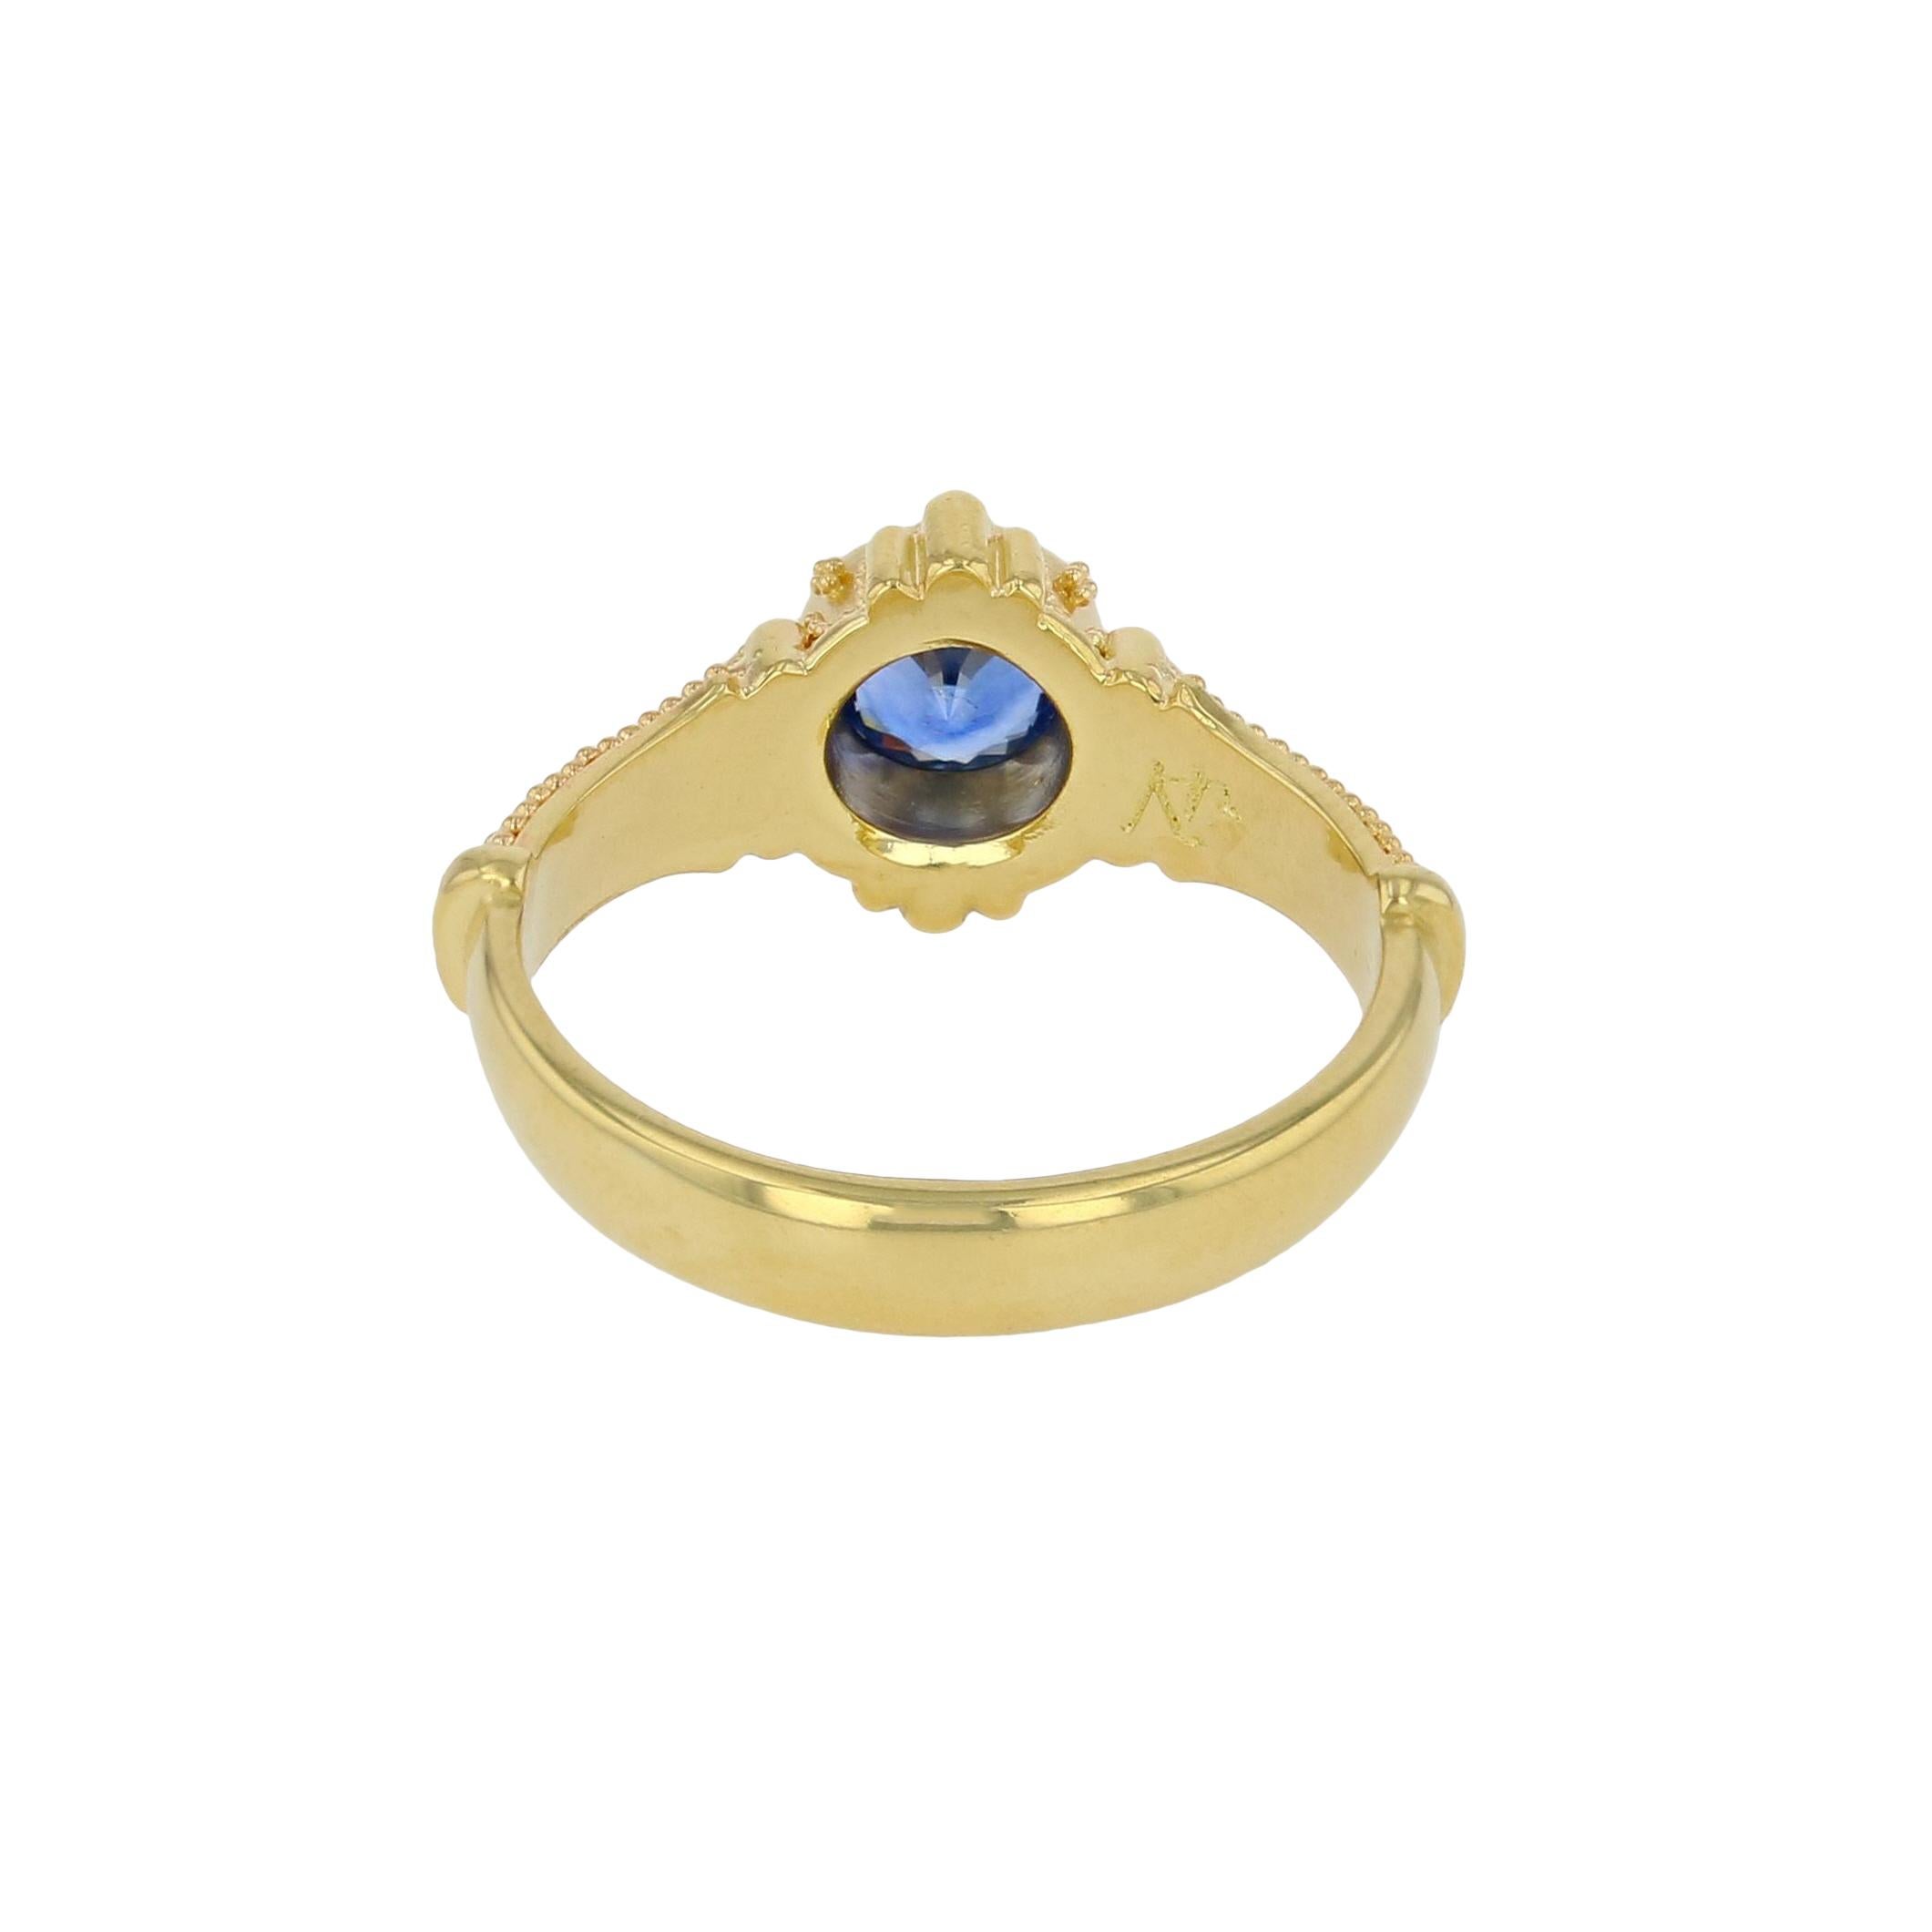 Artisan Kent Raible 18 Karat Gold Solitare Ring with Blue Sapphire and fine Granulation For Sale